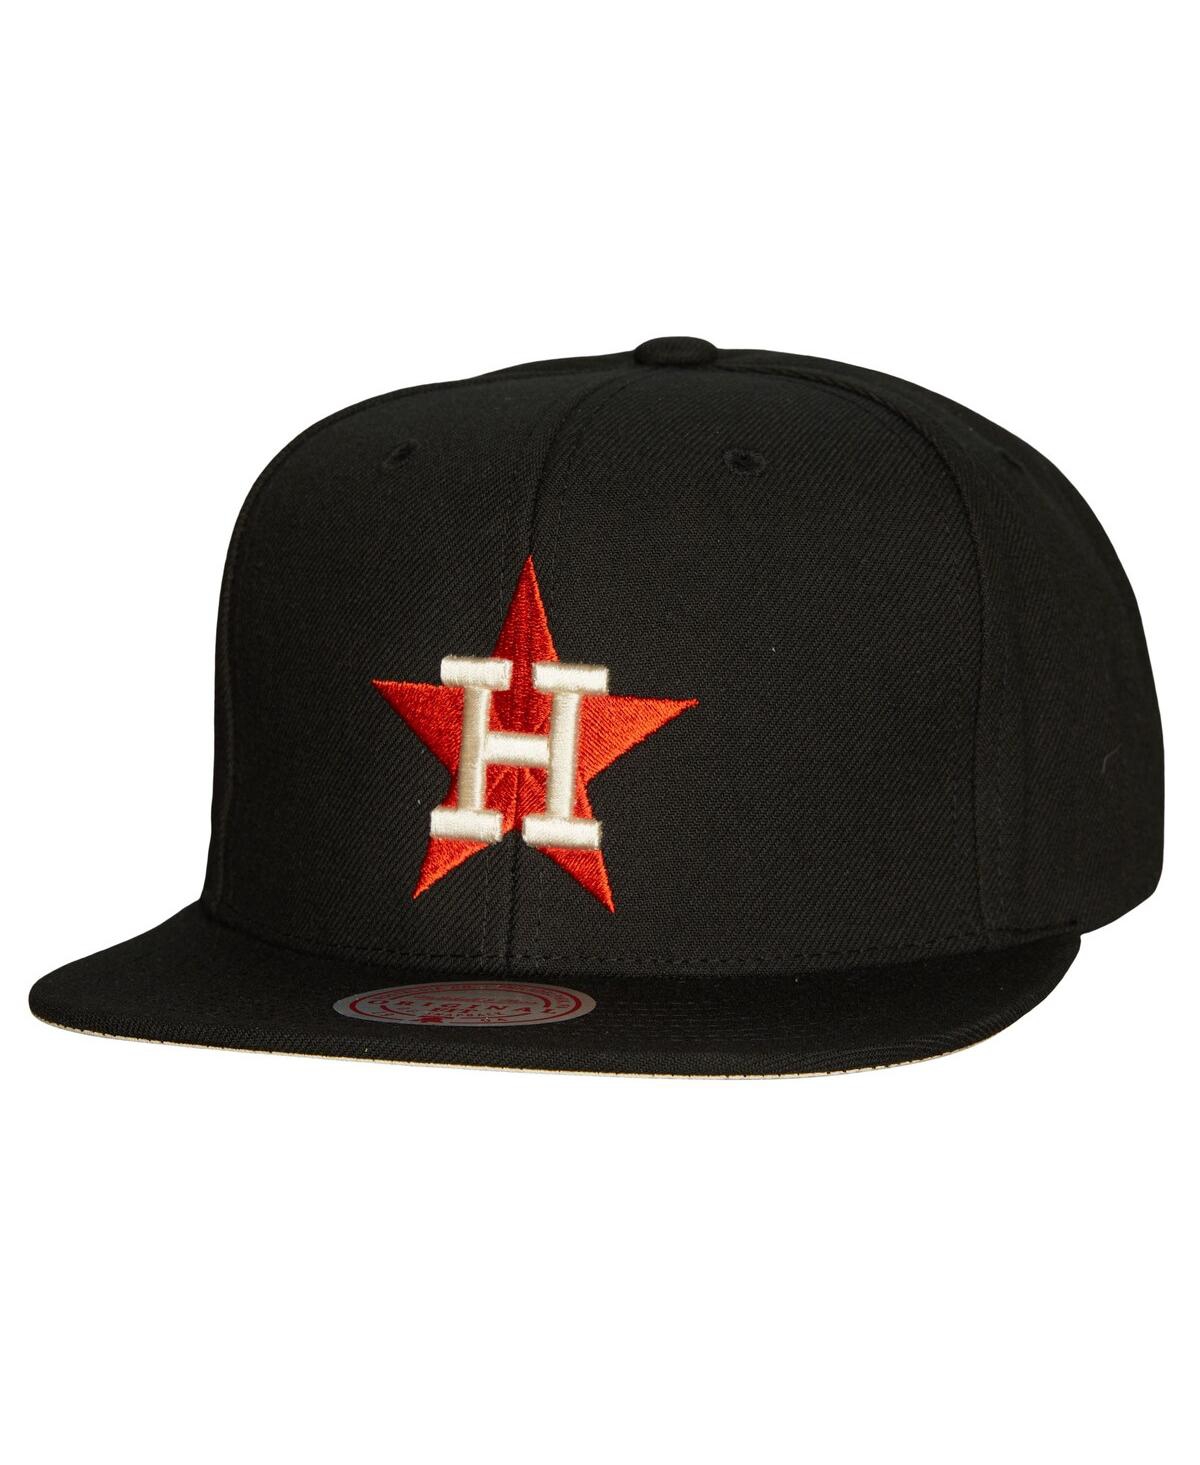 Mitchell & Ness Men's  Black Houston Astros Cooperstown Collection True Classics Snapback Hat